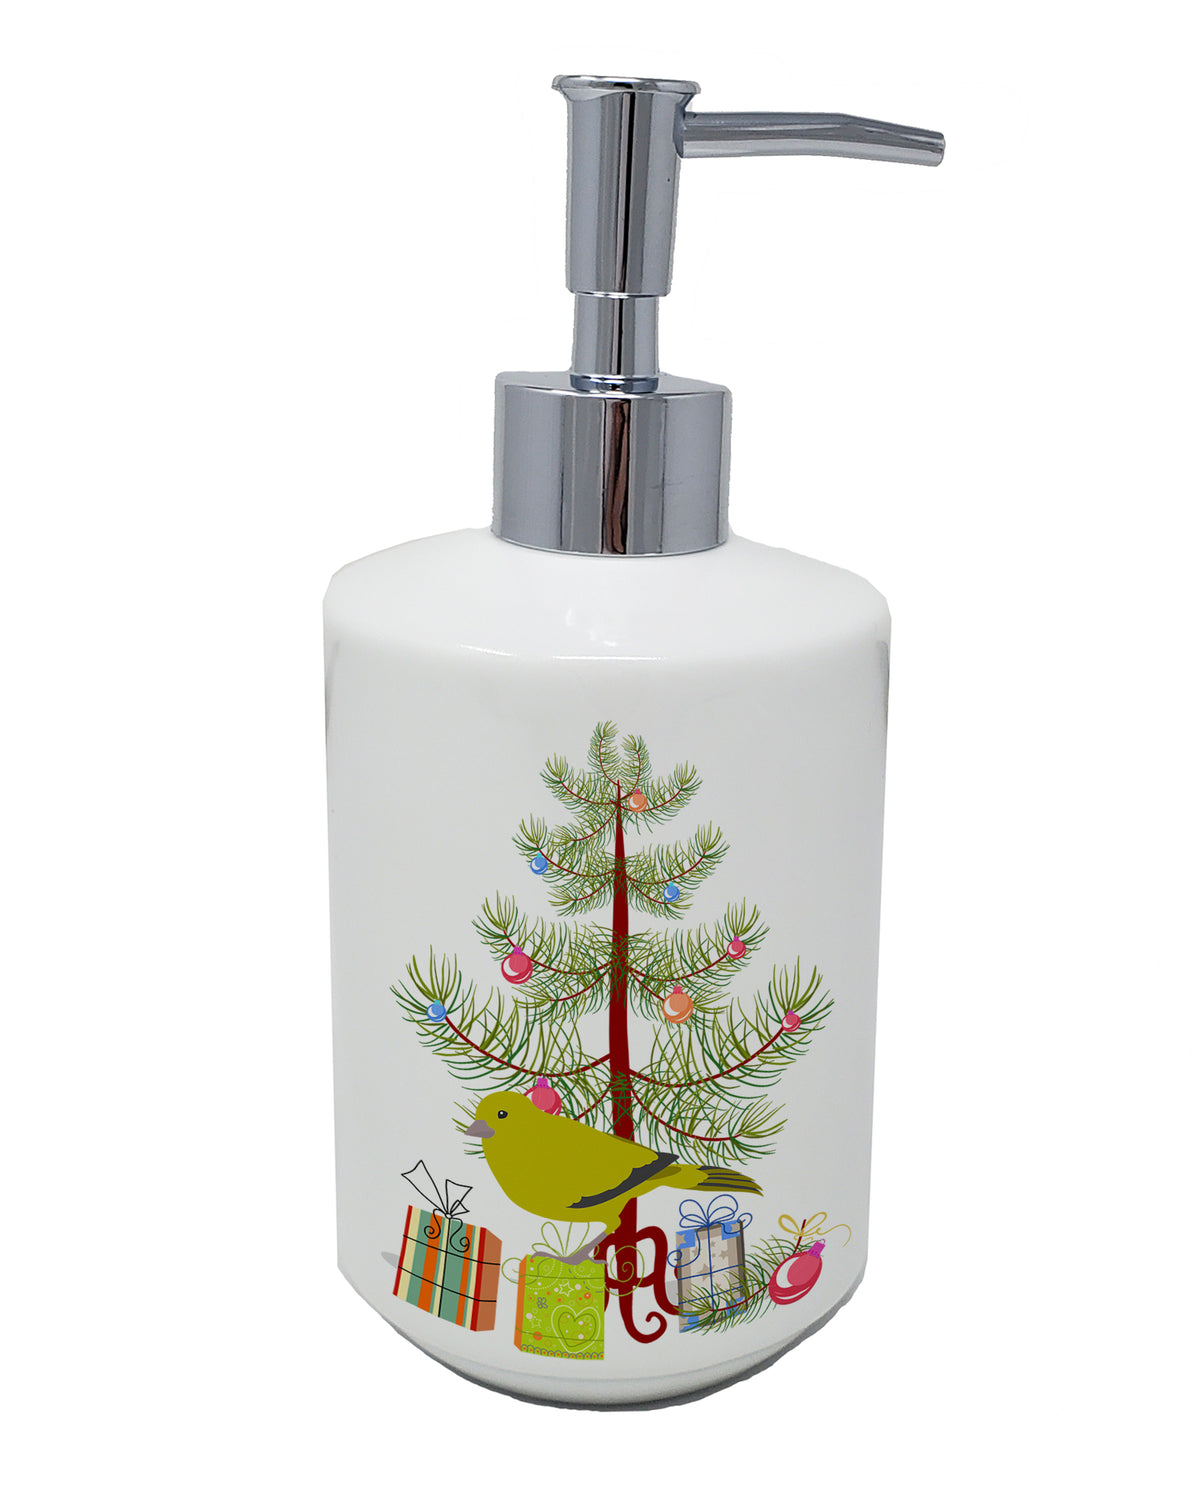 Buy this London Canary Merry Christmas Ceramic Soap Dispenser